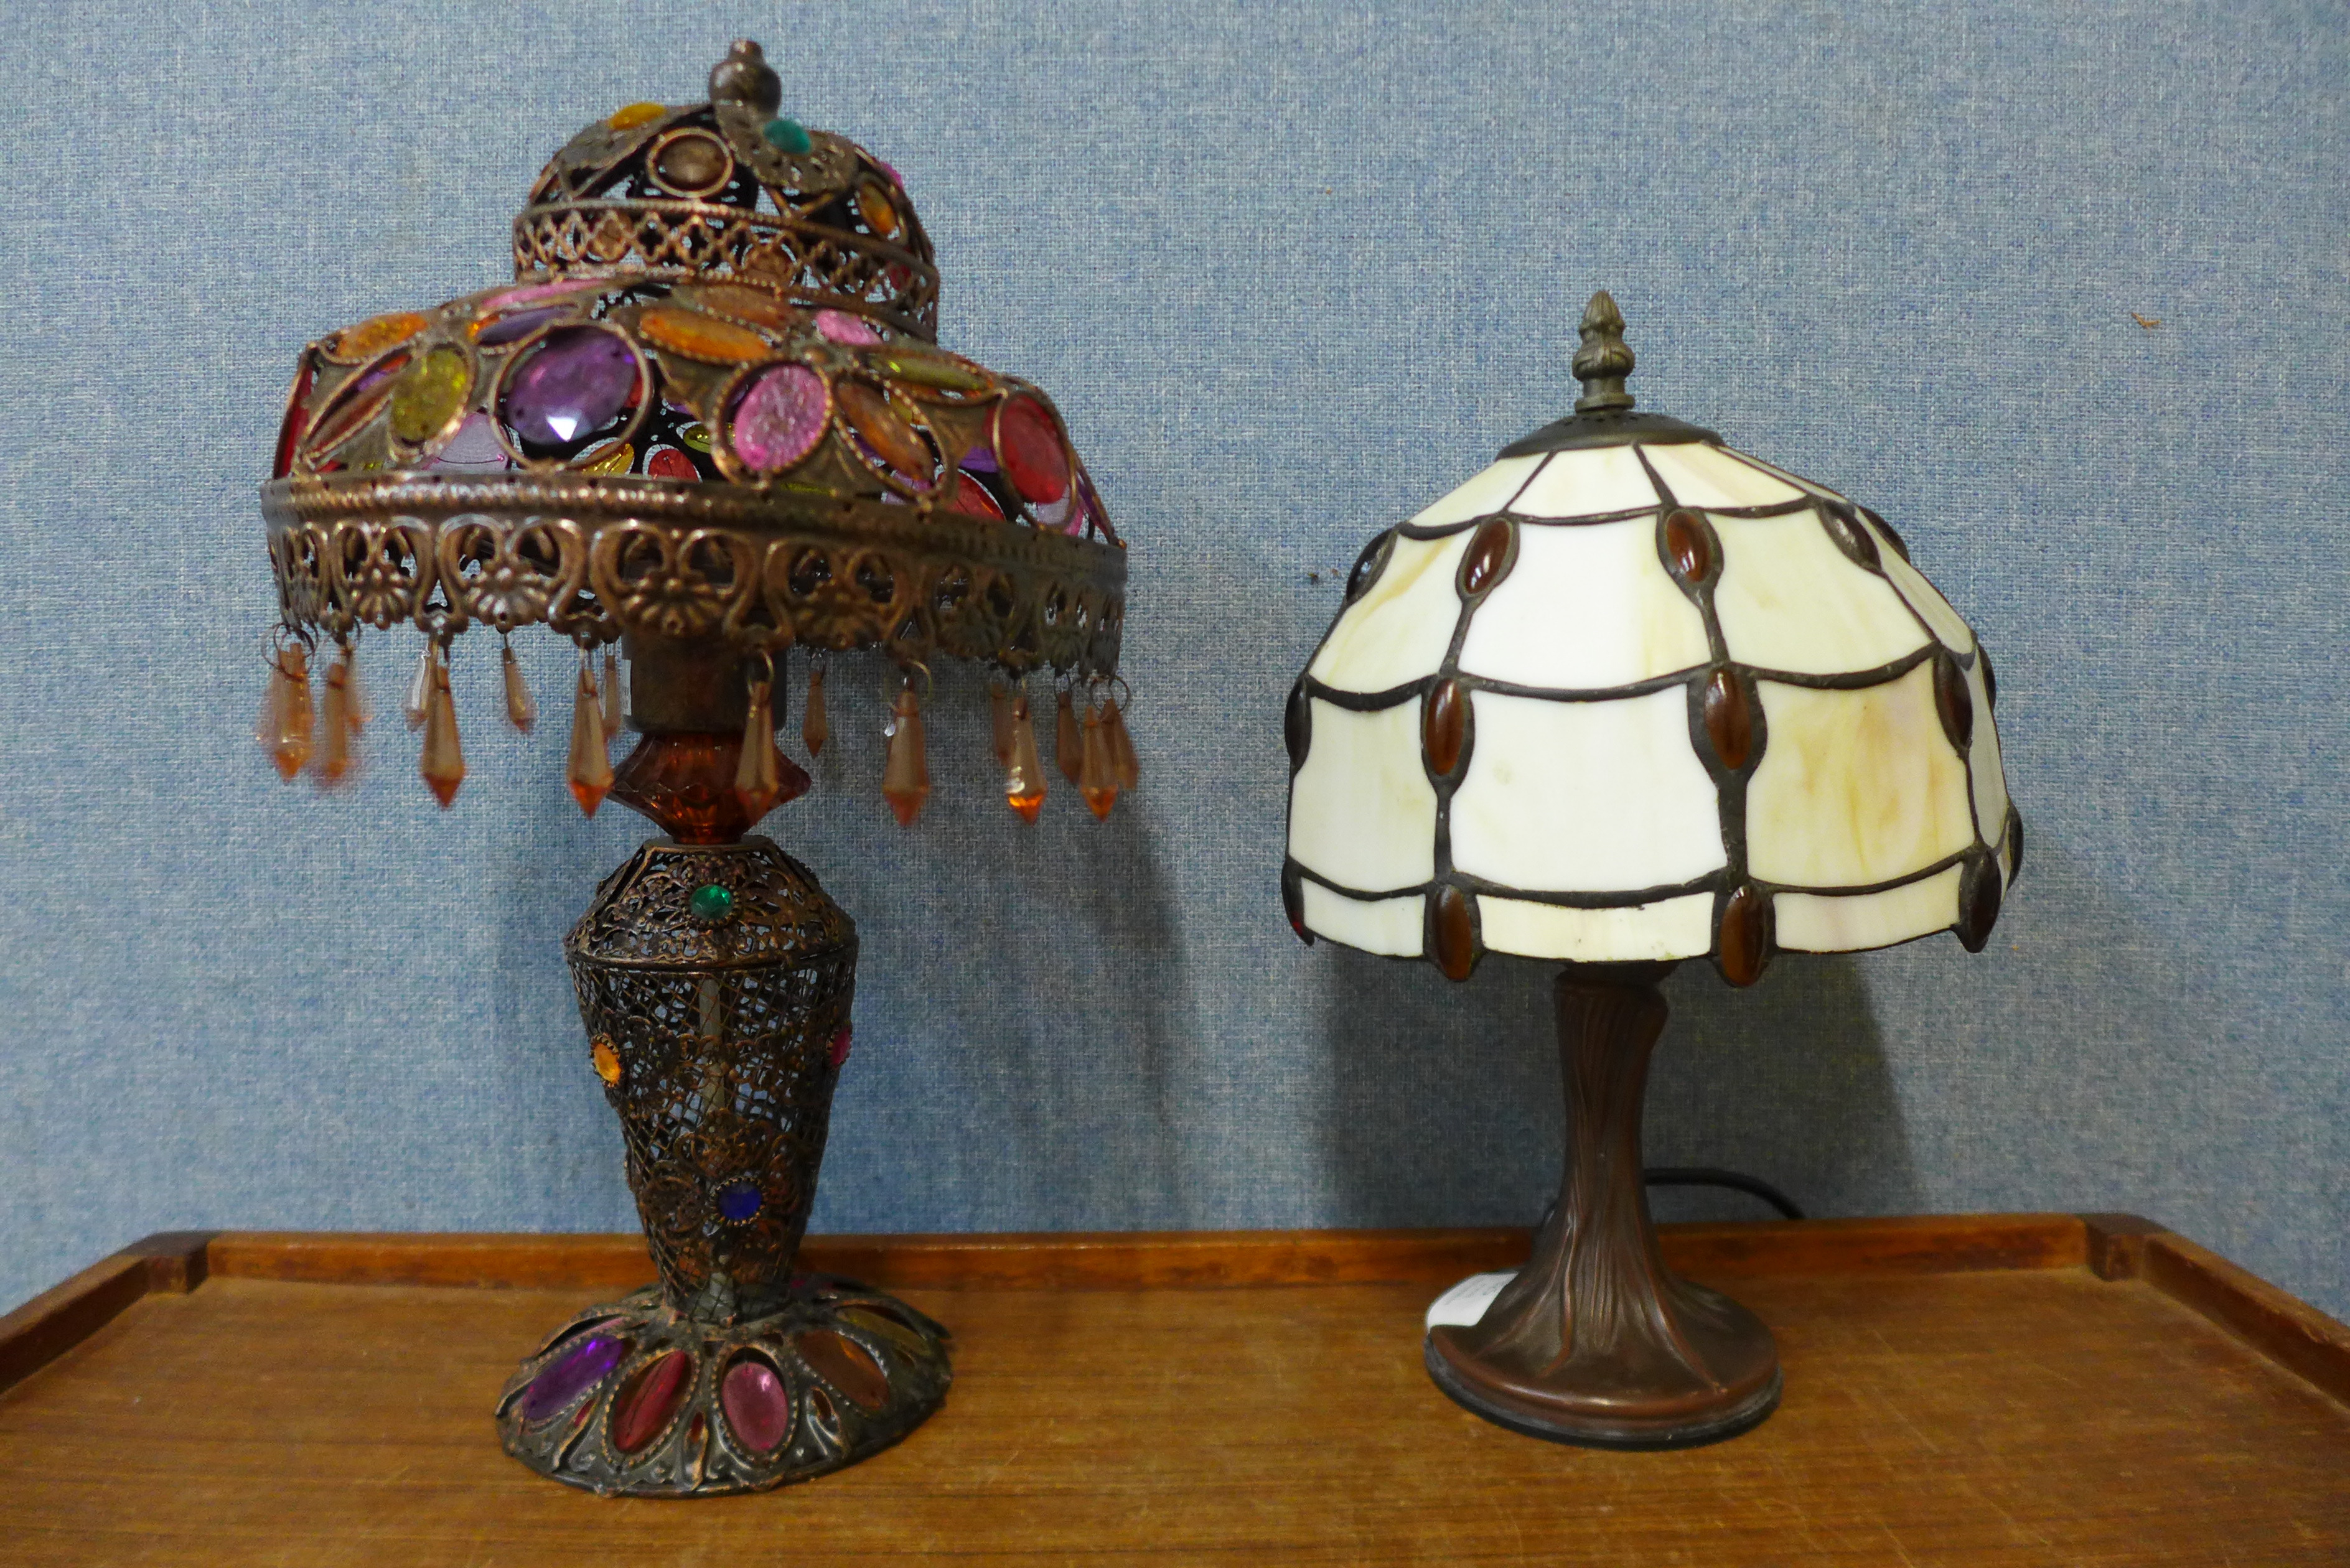 A Tiffany style table lamp and another